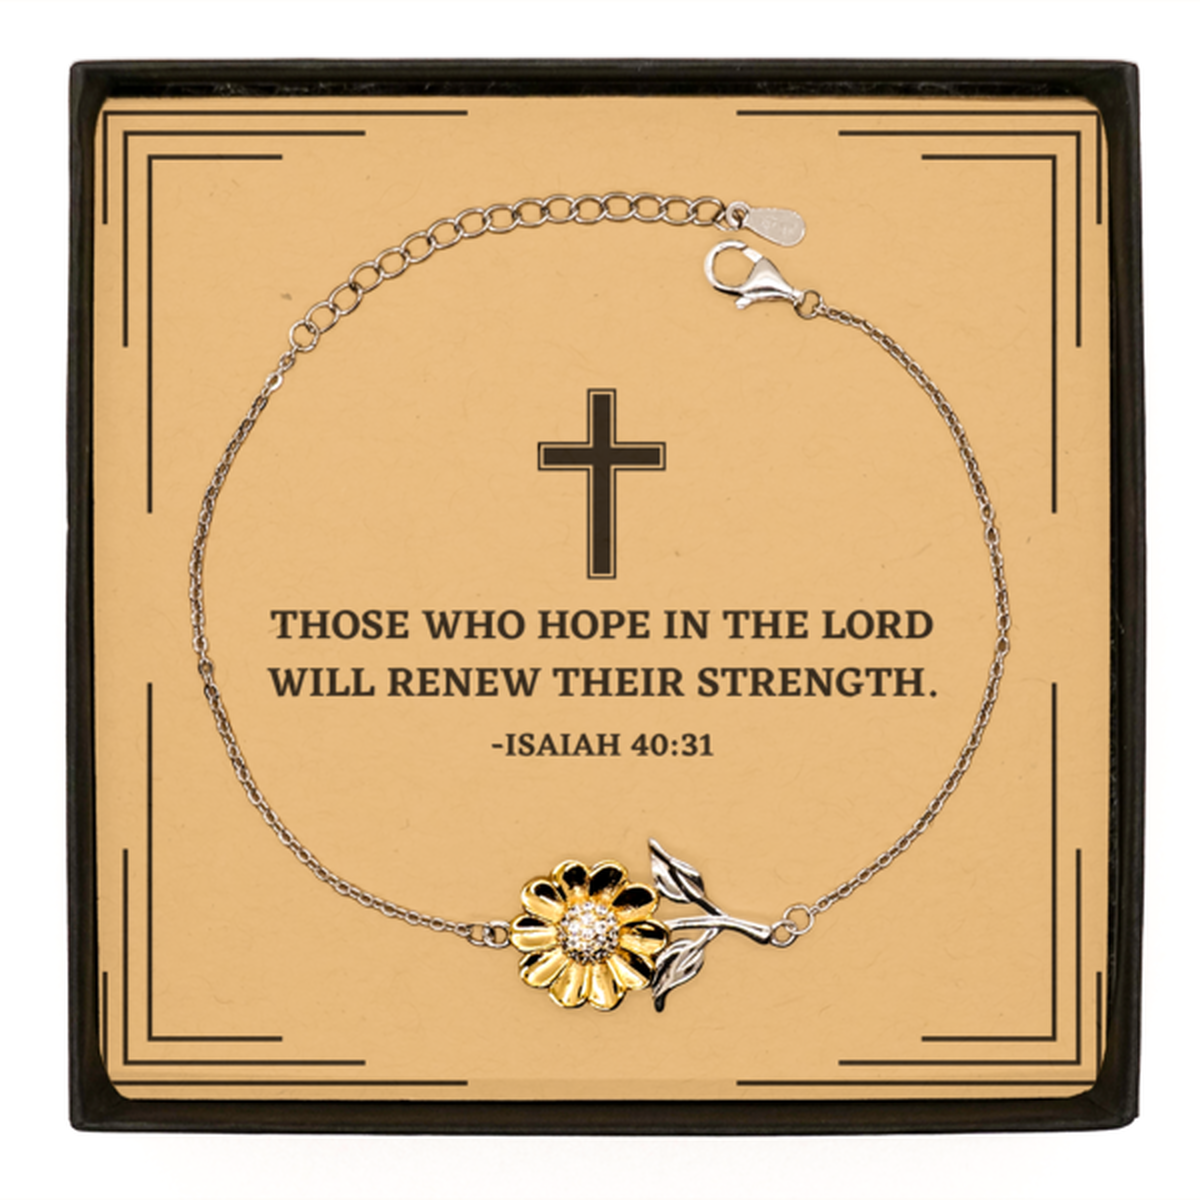 Baptism Gifts For Teenage Boys Girls, Christian Bible Verse Sterling Silver Sunflower Bracelet, Those who hope in the Lord, Confirmation Gifts, Bible Verse Card for Son, Godson, Grandson